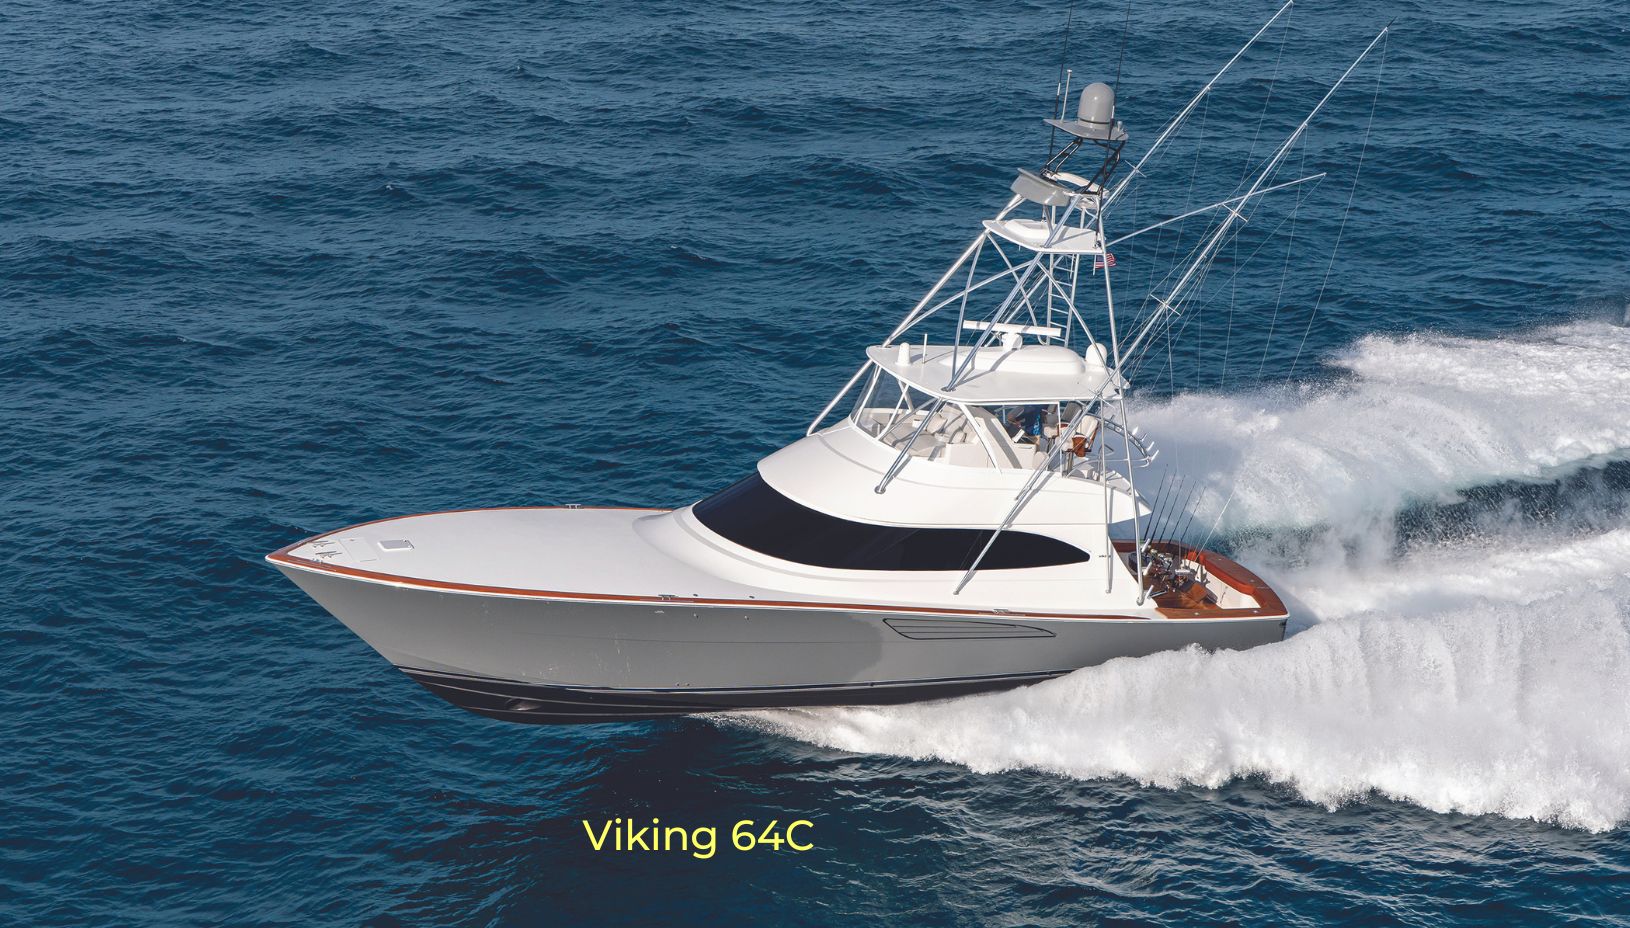 Top American Boat Brands For Any Style of Boating - Galati Yachts